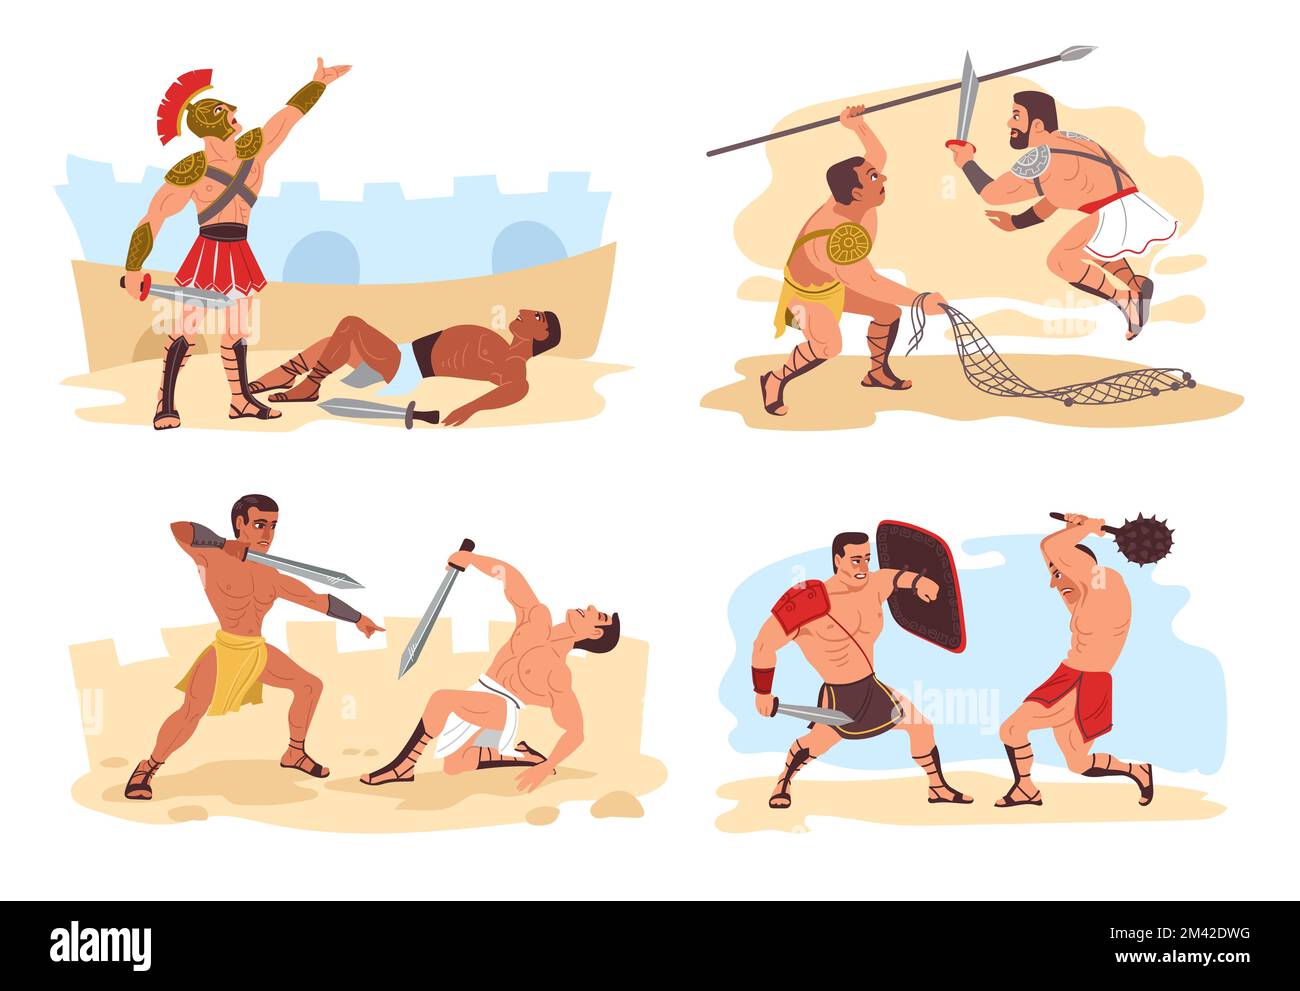 Gladiators fight scenes. Ancient Roman warriors. People in armor. Muscular legionnaires in battlefield. Colosseum war battles set. Soldiers attacking Stock Vector